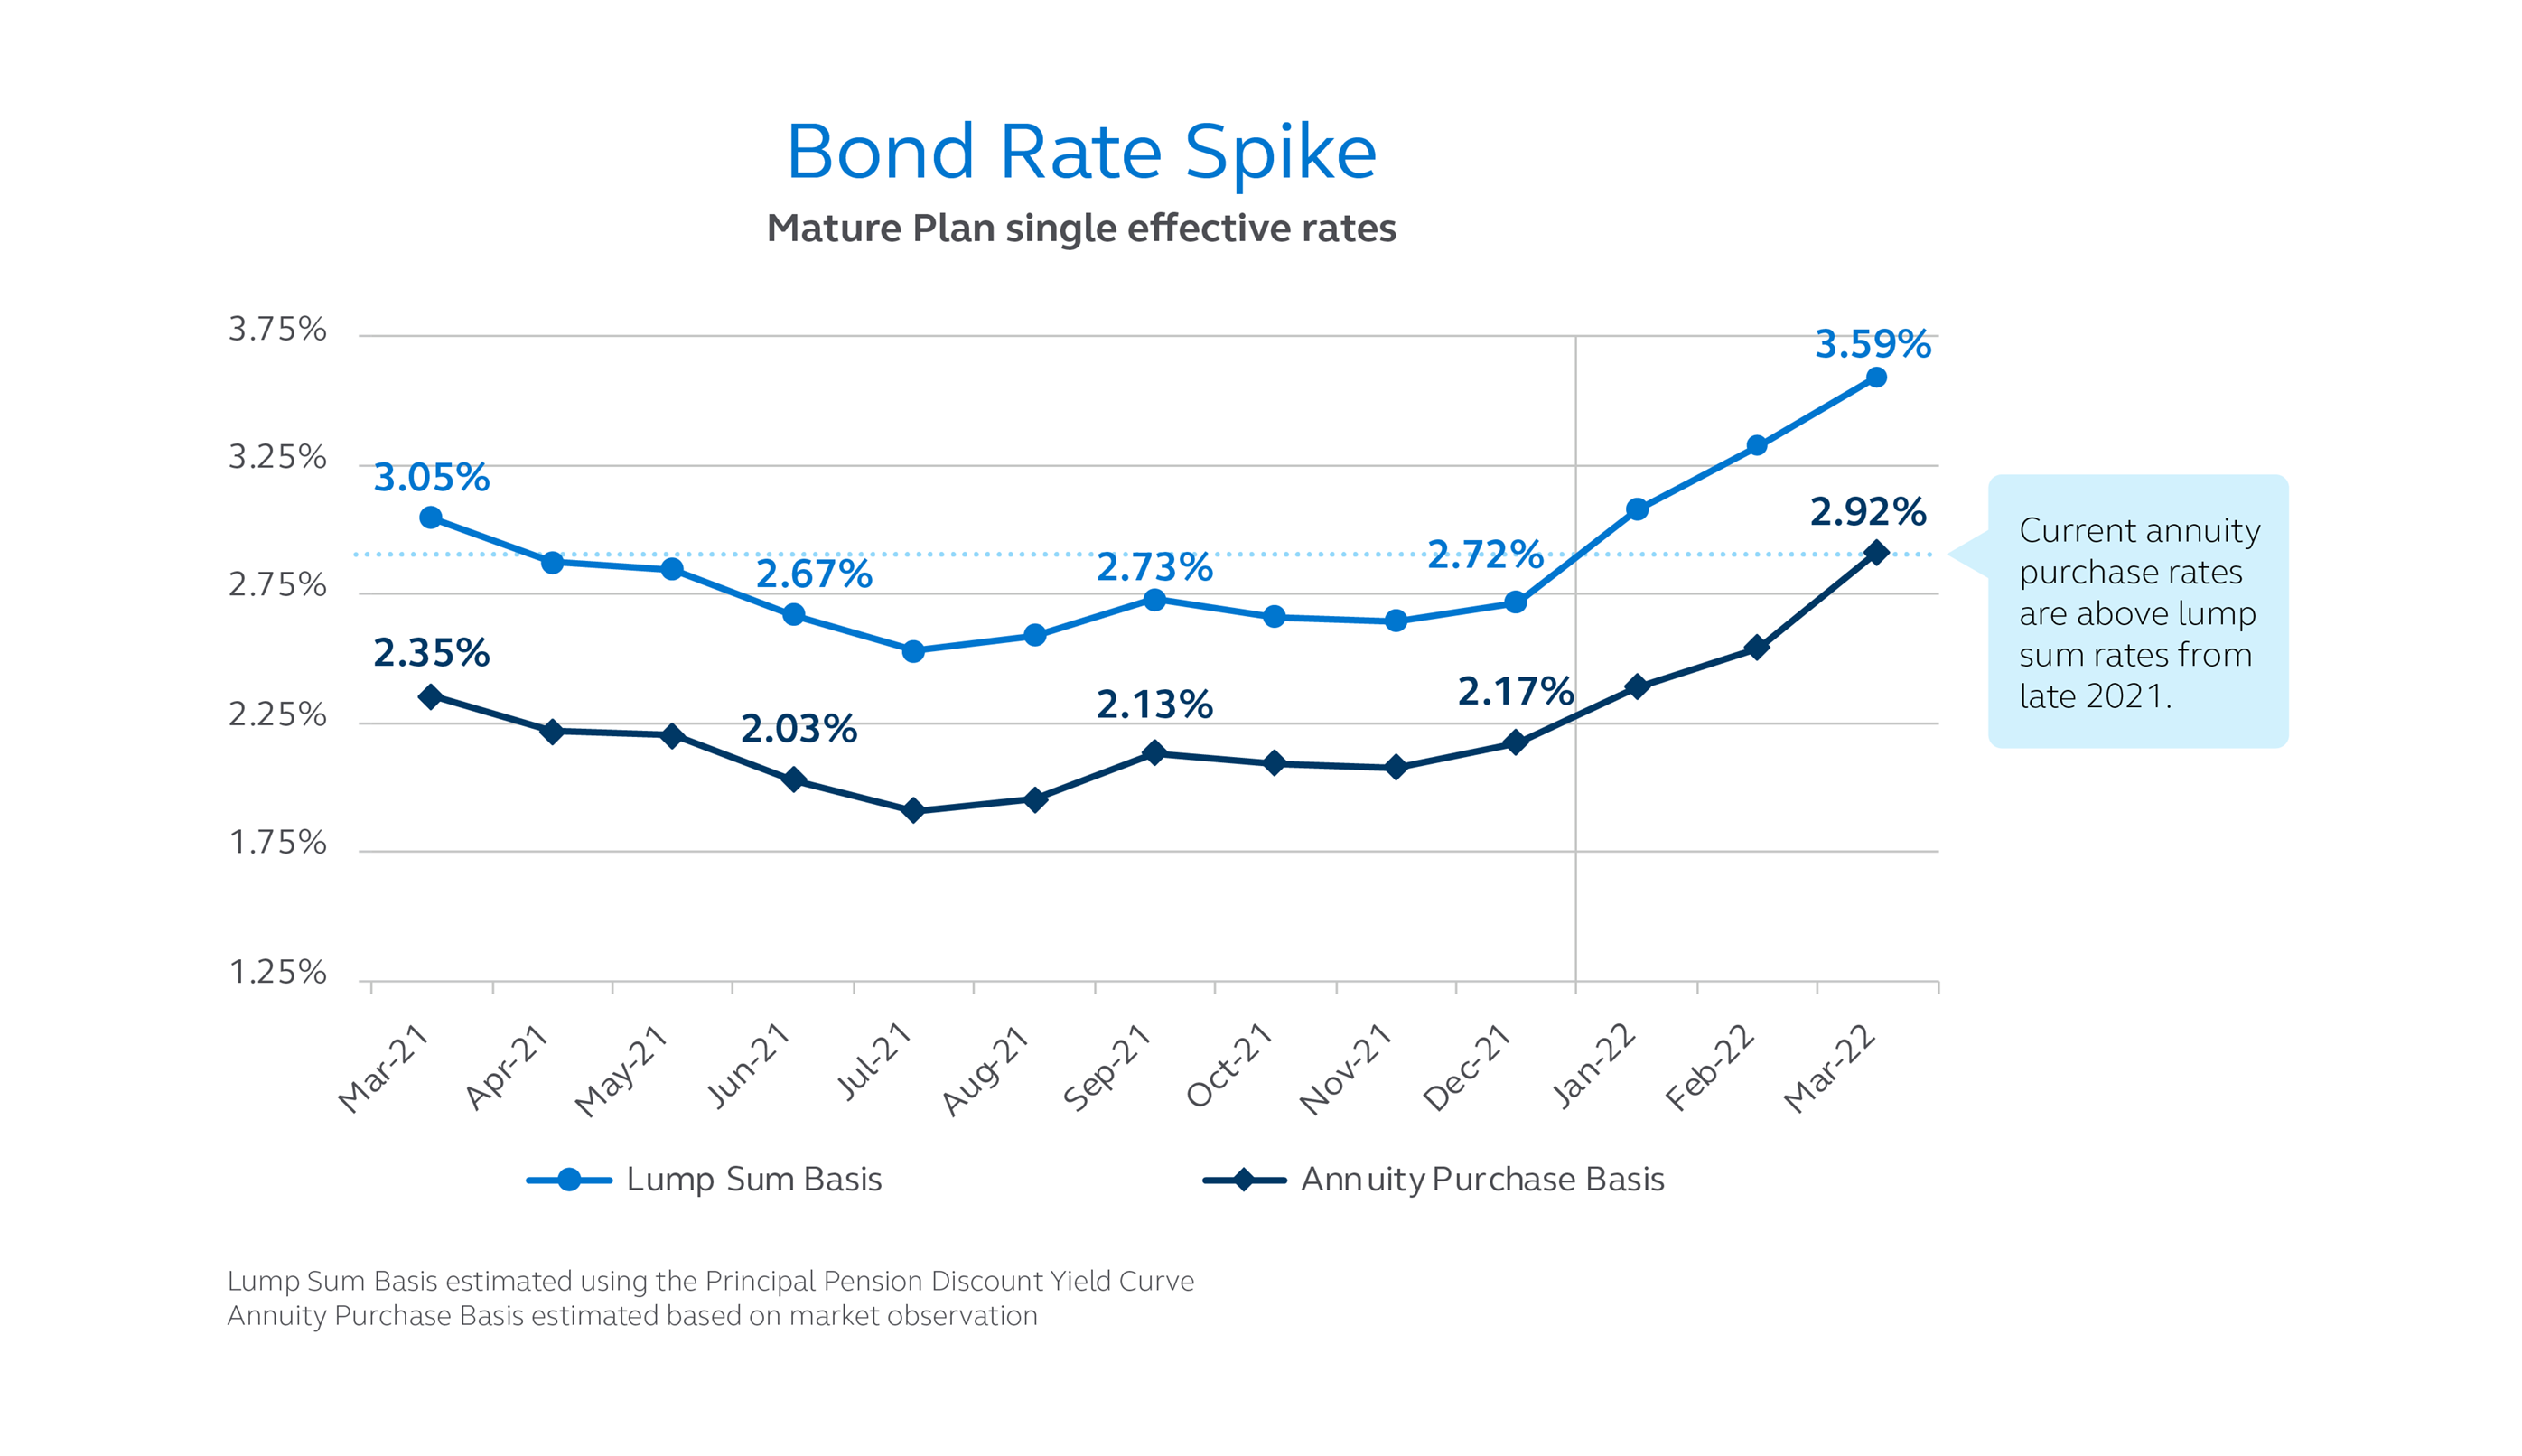 Chart showing bond rate spike increasing for mature plan single effective rates for lump sum basis and annuity purchase basis, above 2021.